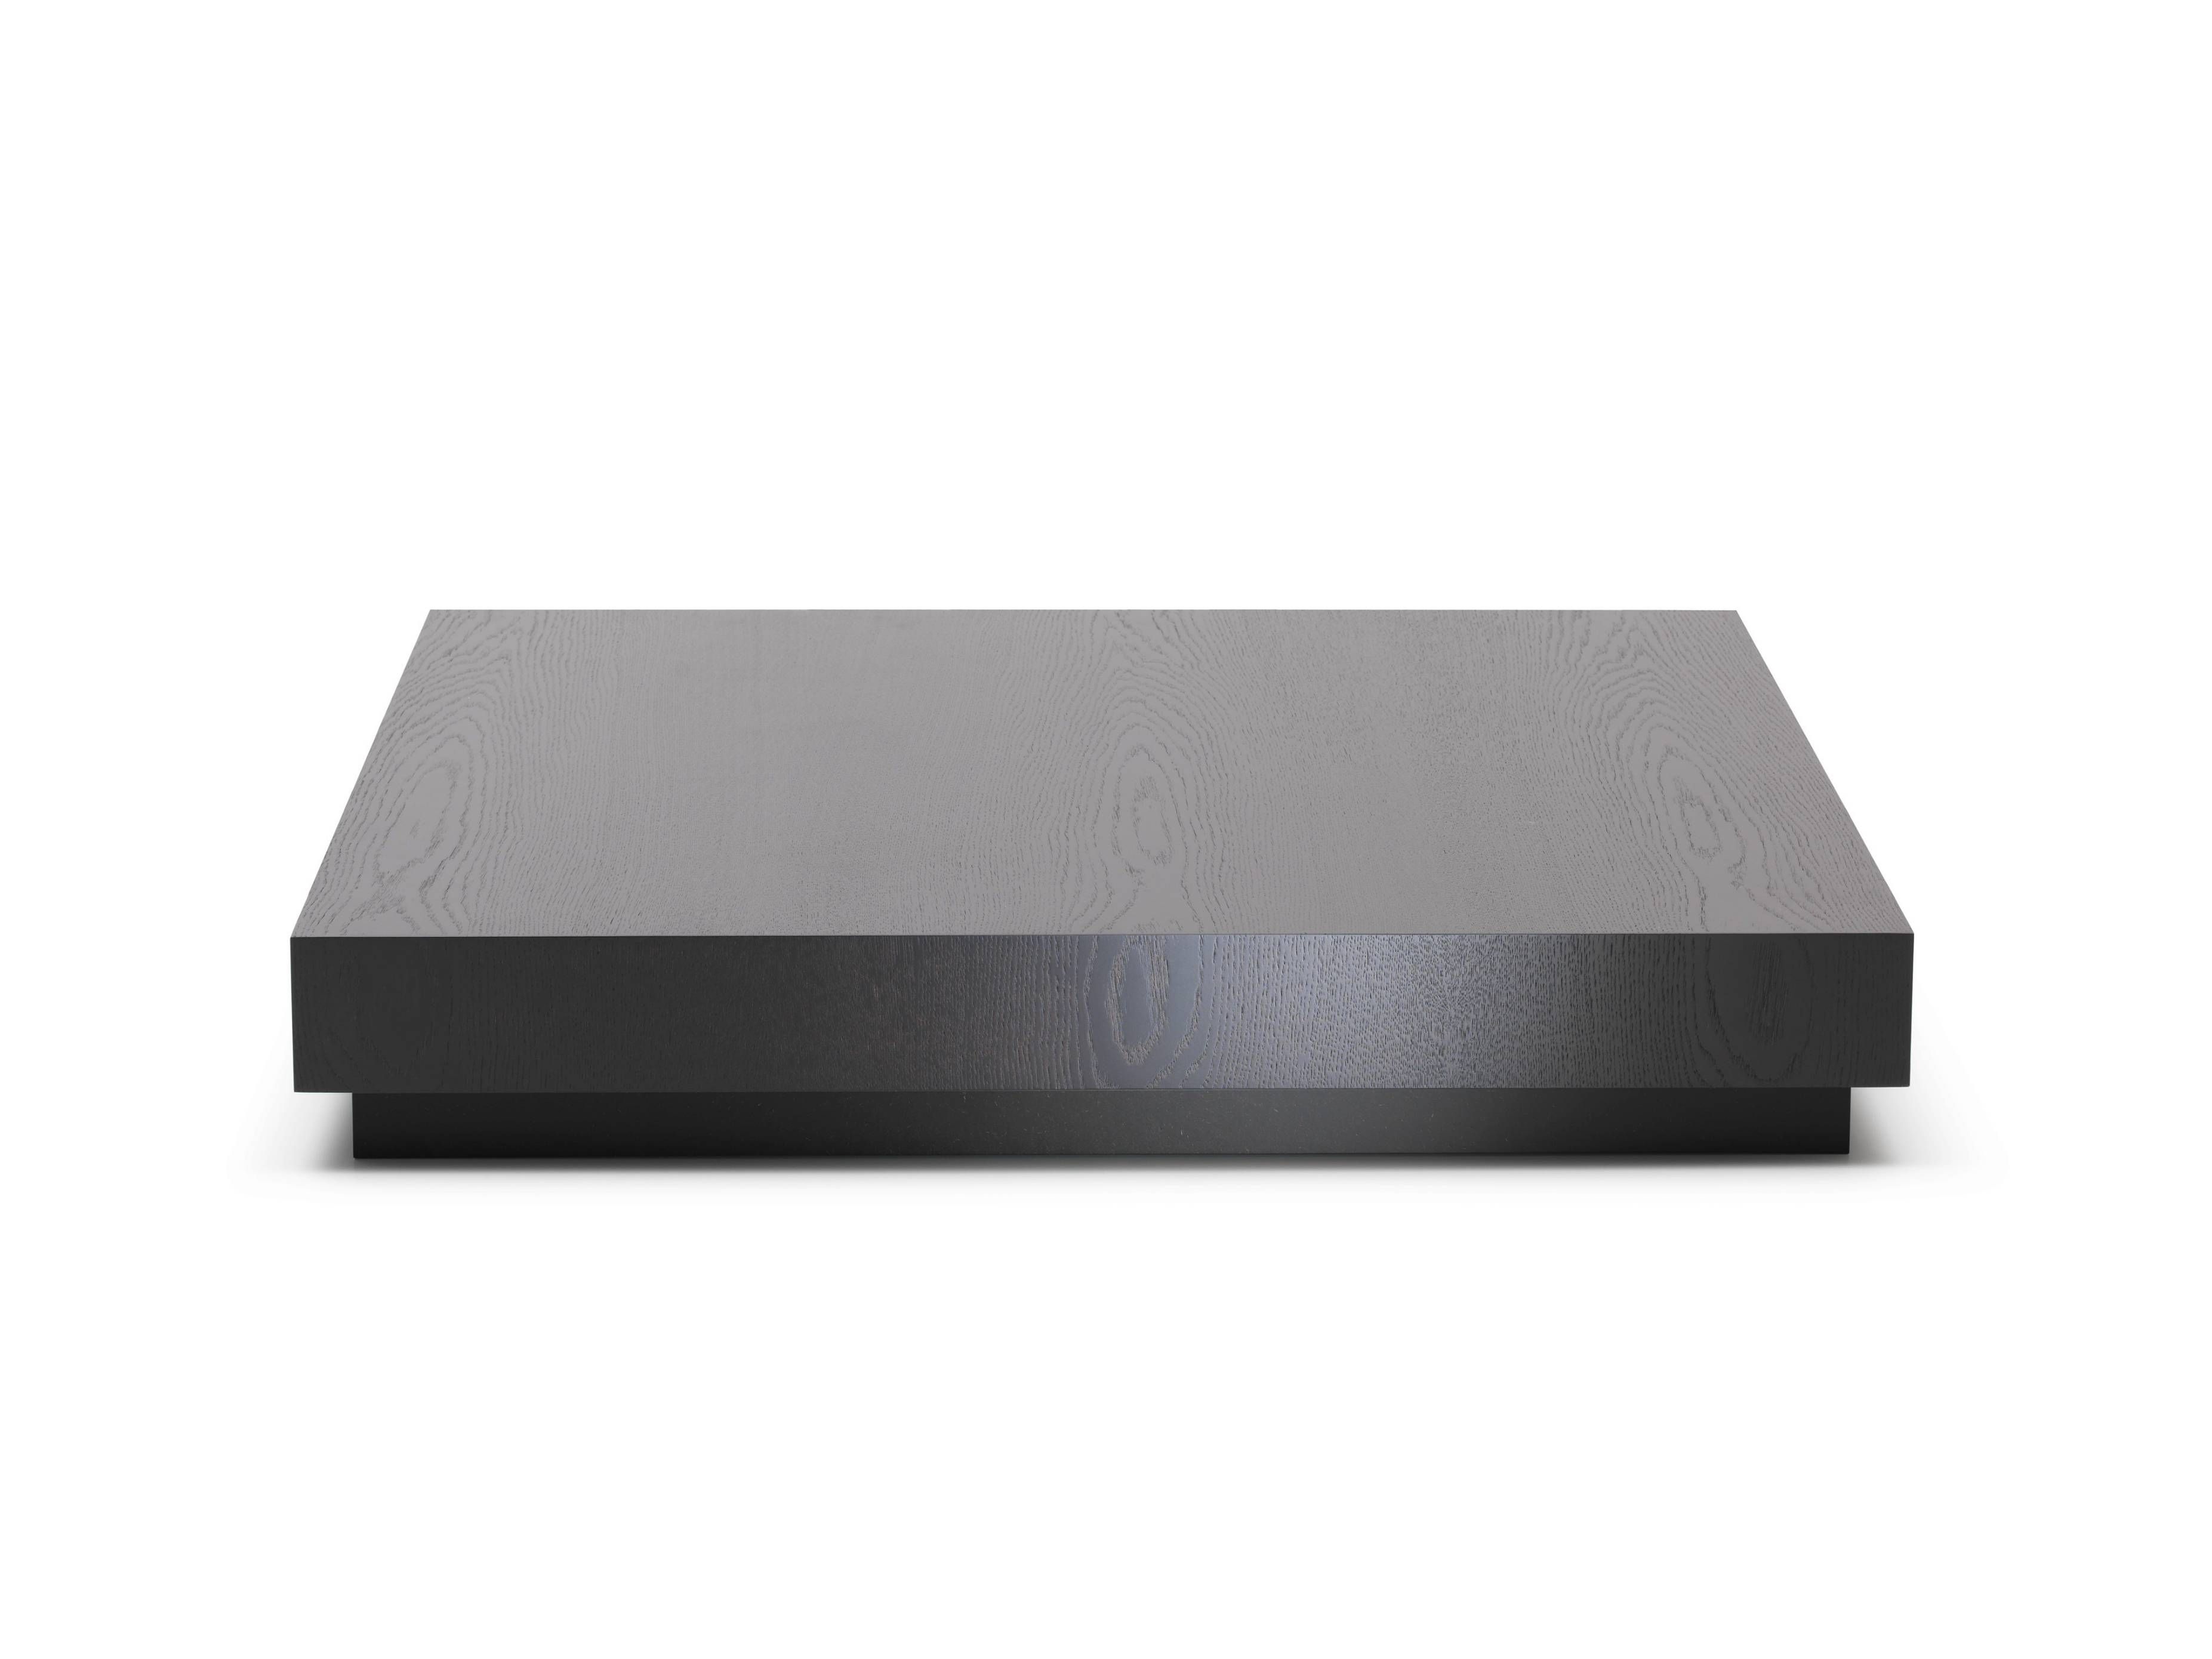 Square Wood Low Profile Coffee Table Painted With Black Color For Throughout Low Wood Coffee Tables (View 8 of 15)